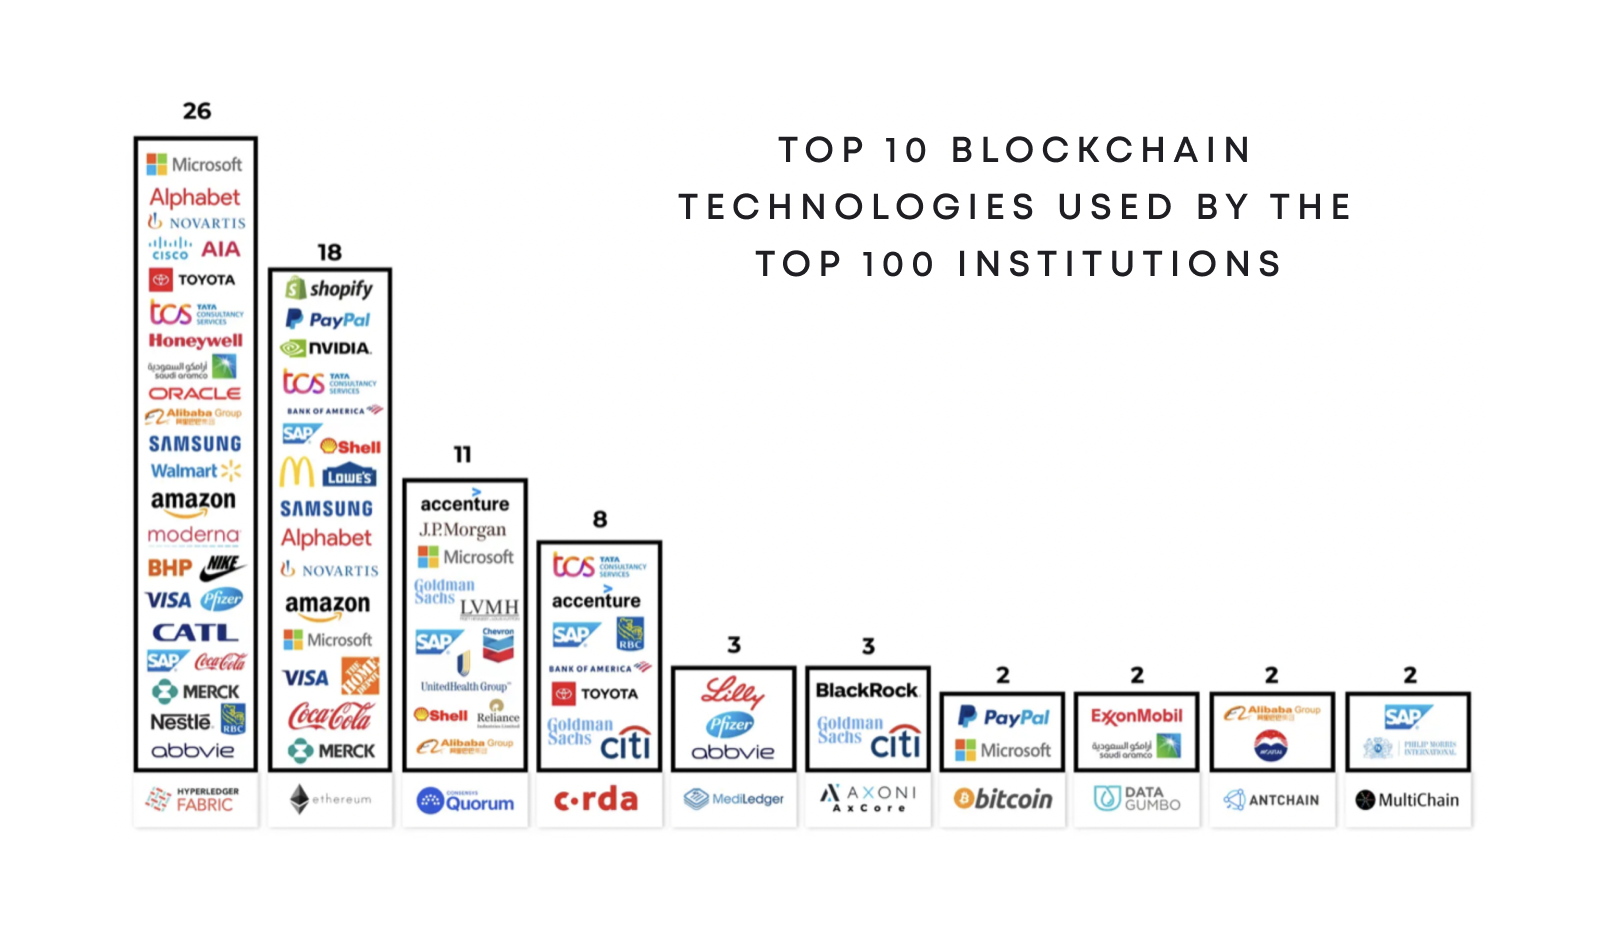 Top 10 blockchain technologies used by the top 100 institutions